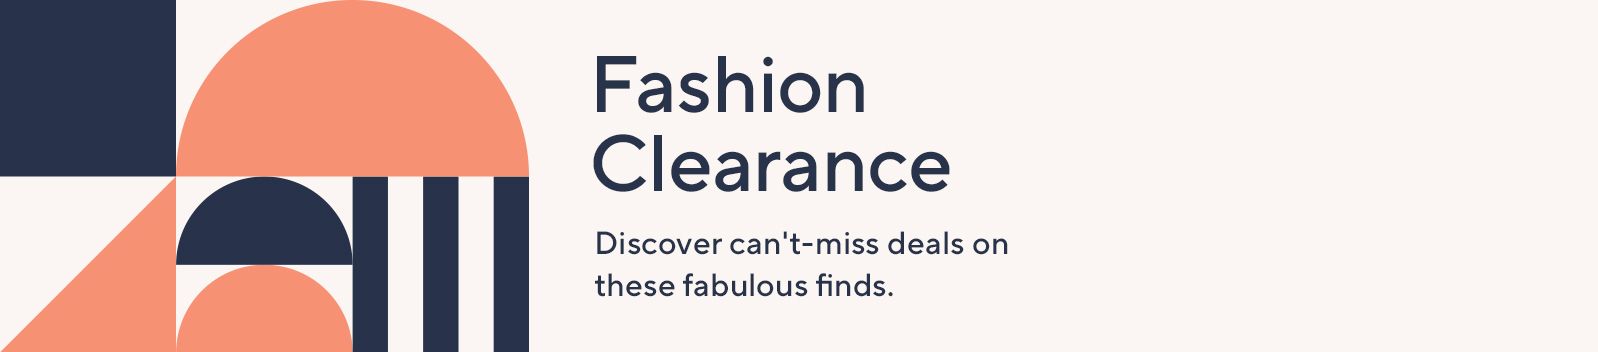 Fashion Clearance Discover can't-miss deals on these fabulous finds